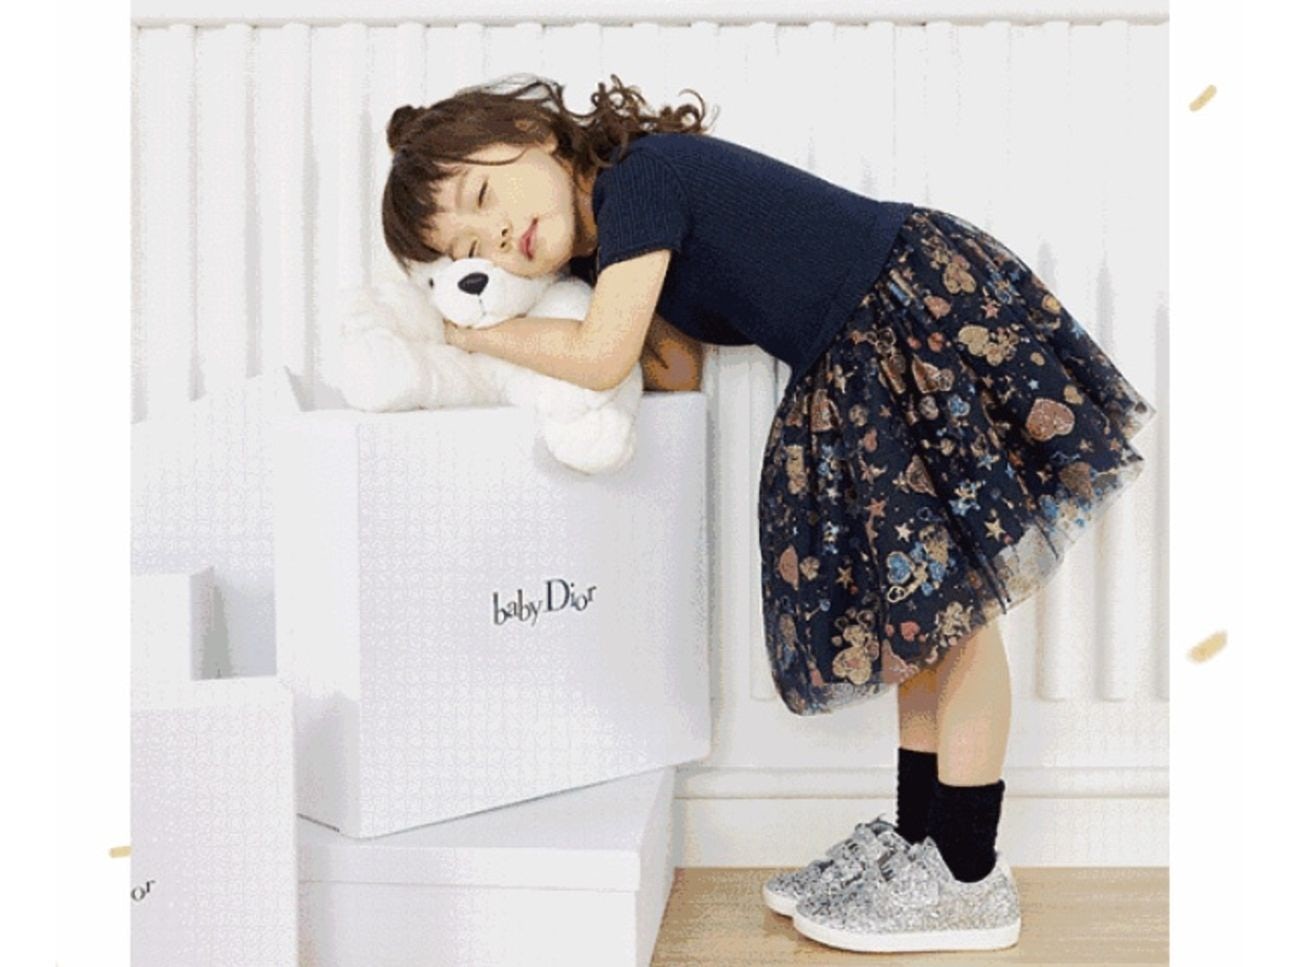 Whatever Baby Wants: 5 Savvy WeChat Luxury Campaigns for Children’s Day